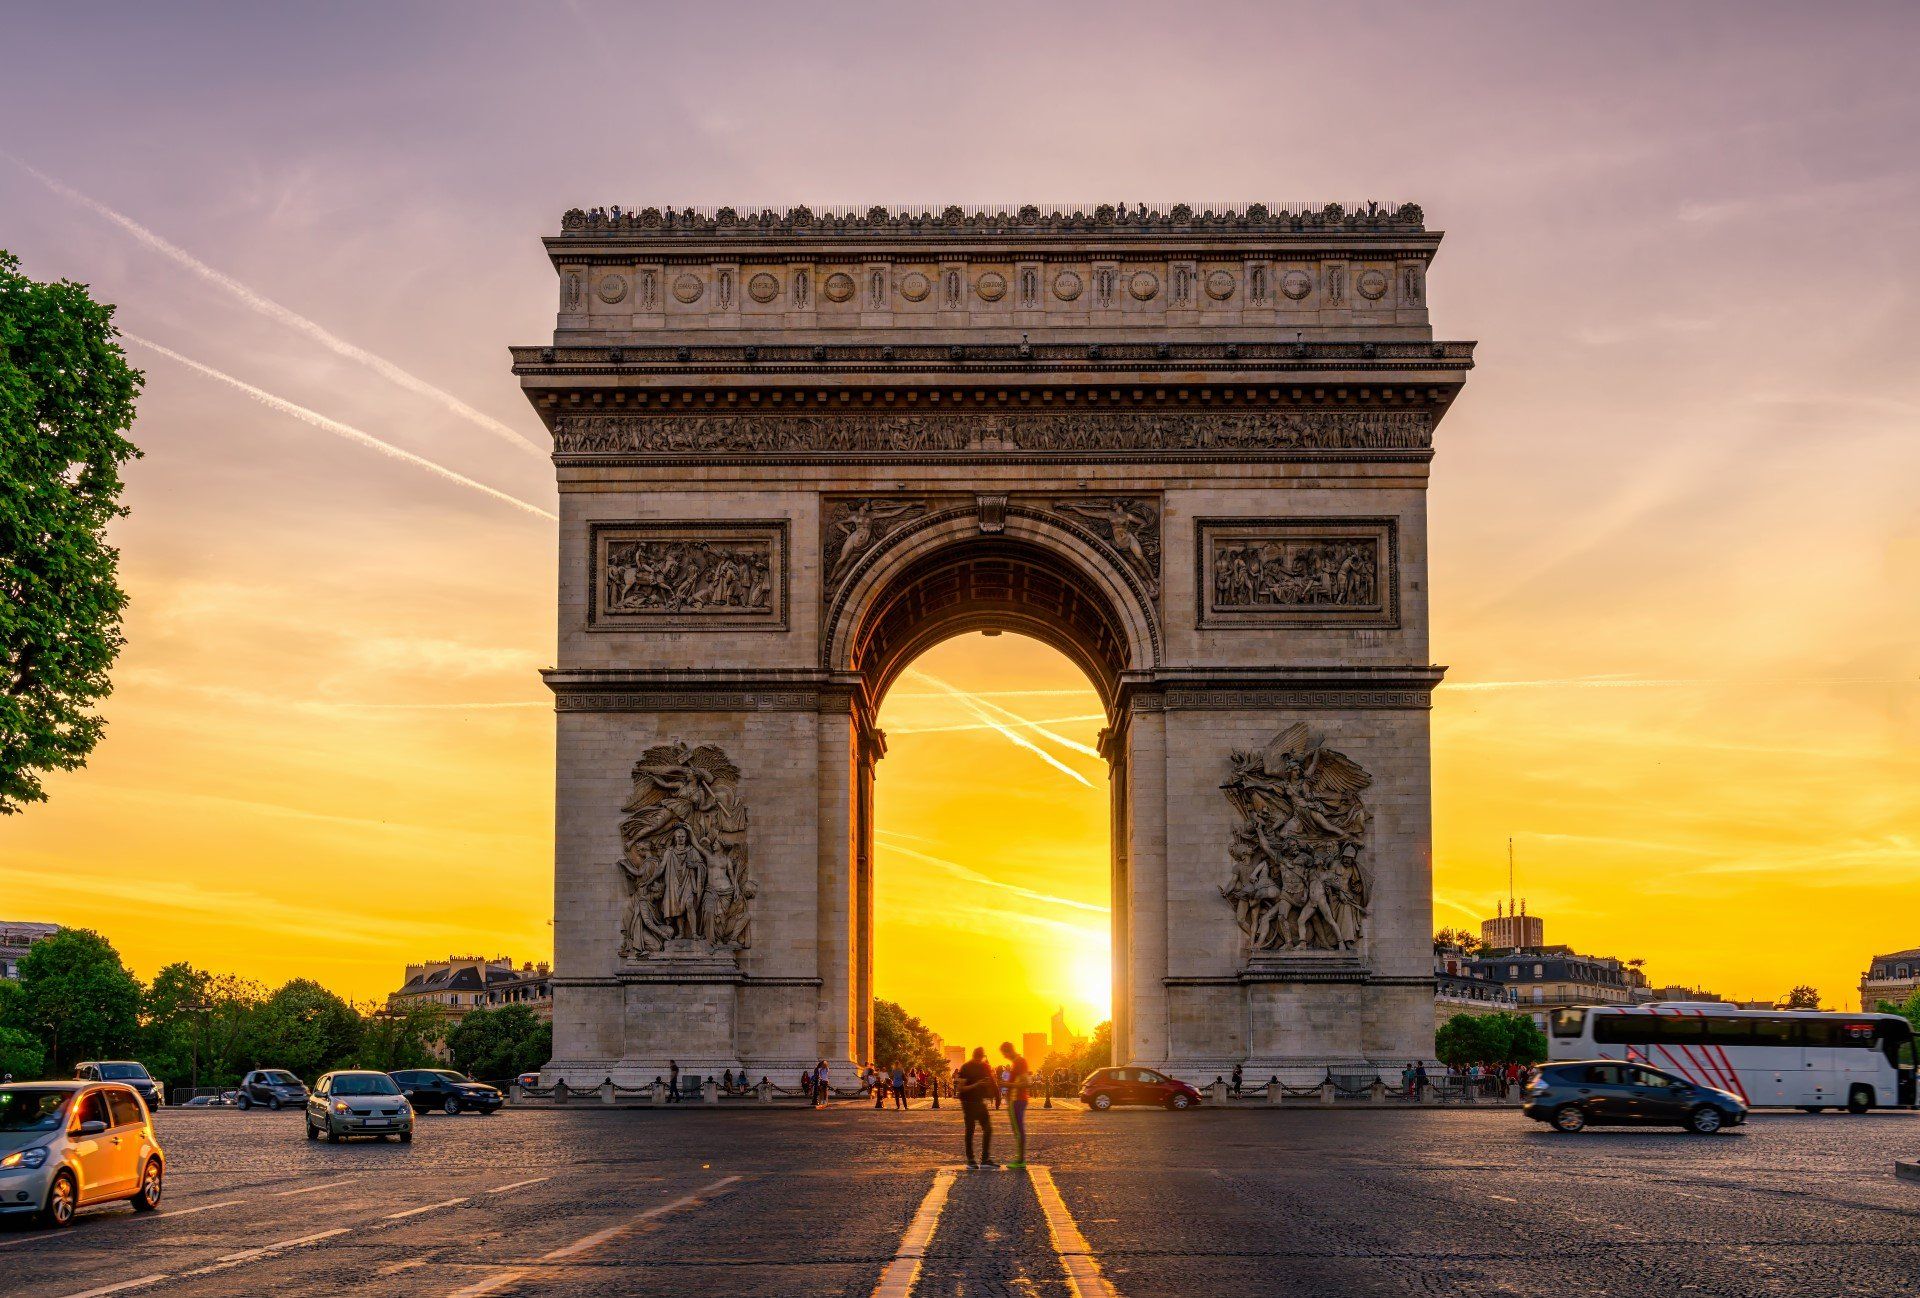 One of the most iconic Parisian monuments, admire the exquisite architecture of the Triumphal Arch of the Star